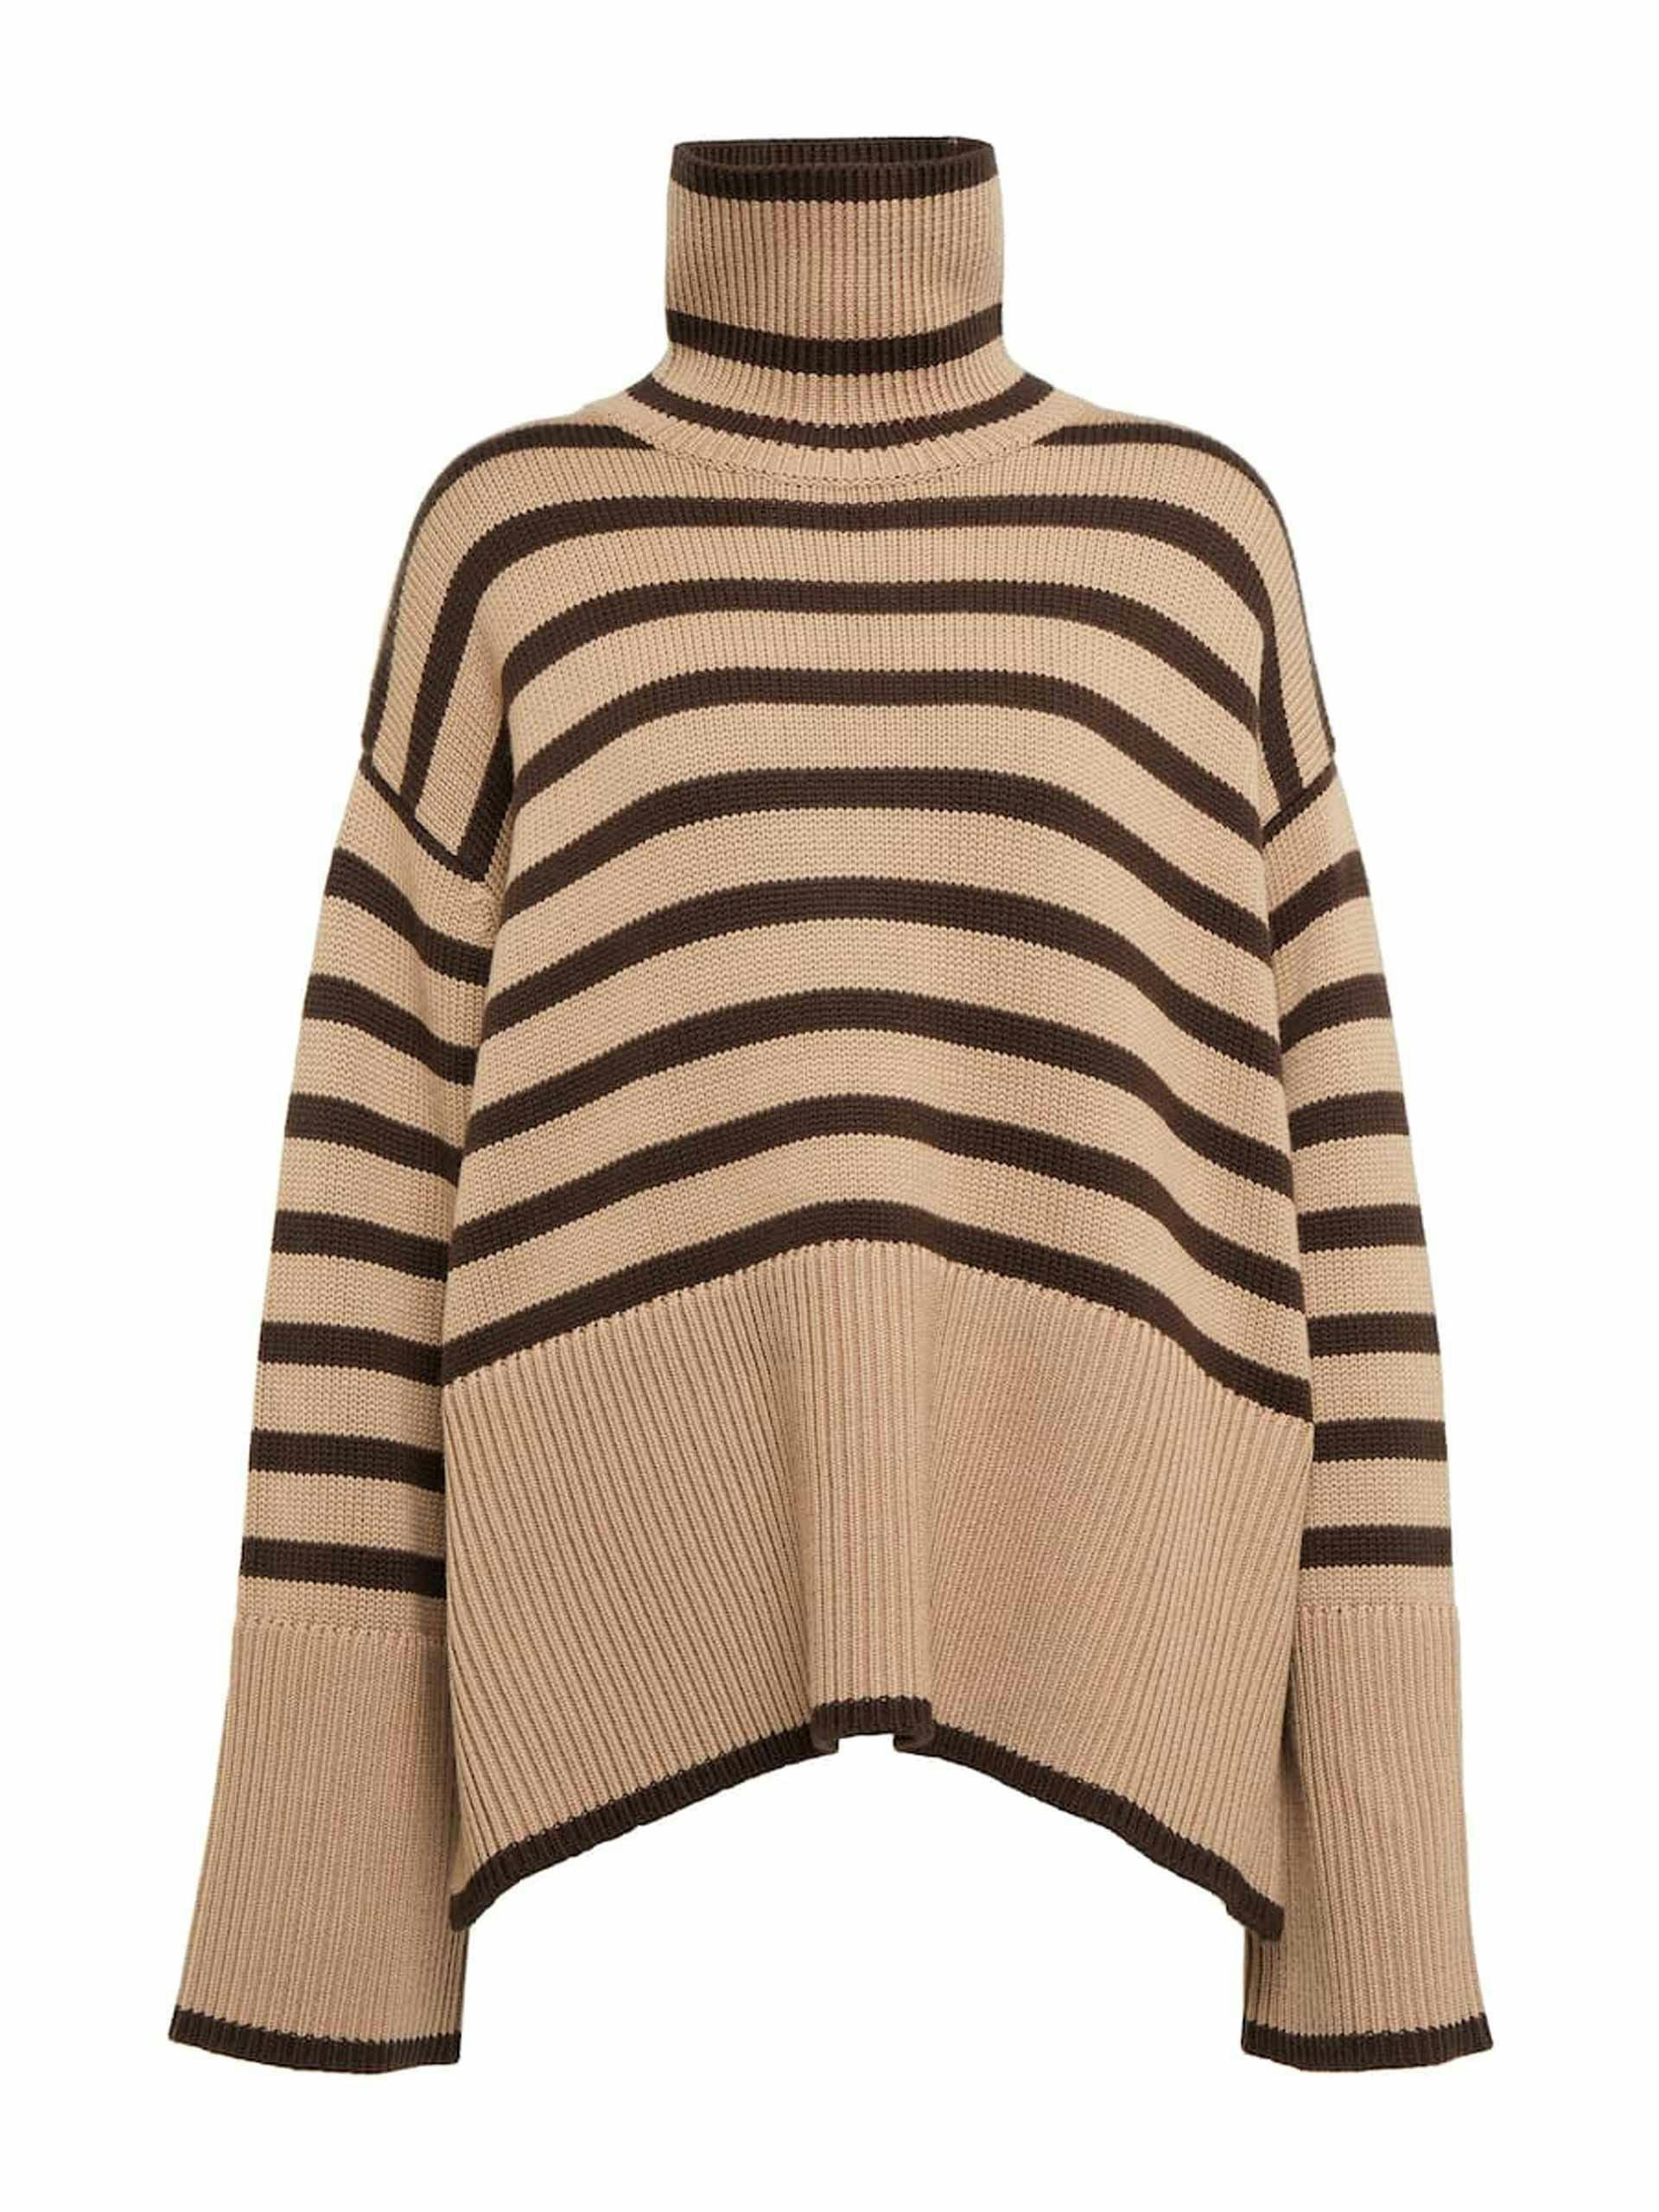 Striped wool and cotton sweater